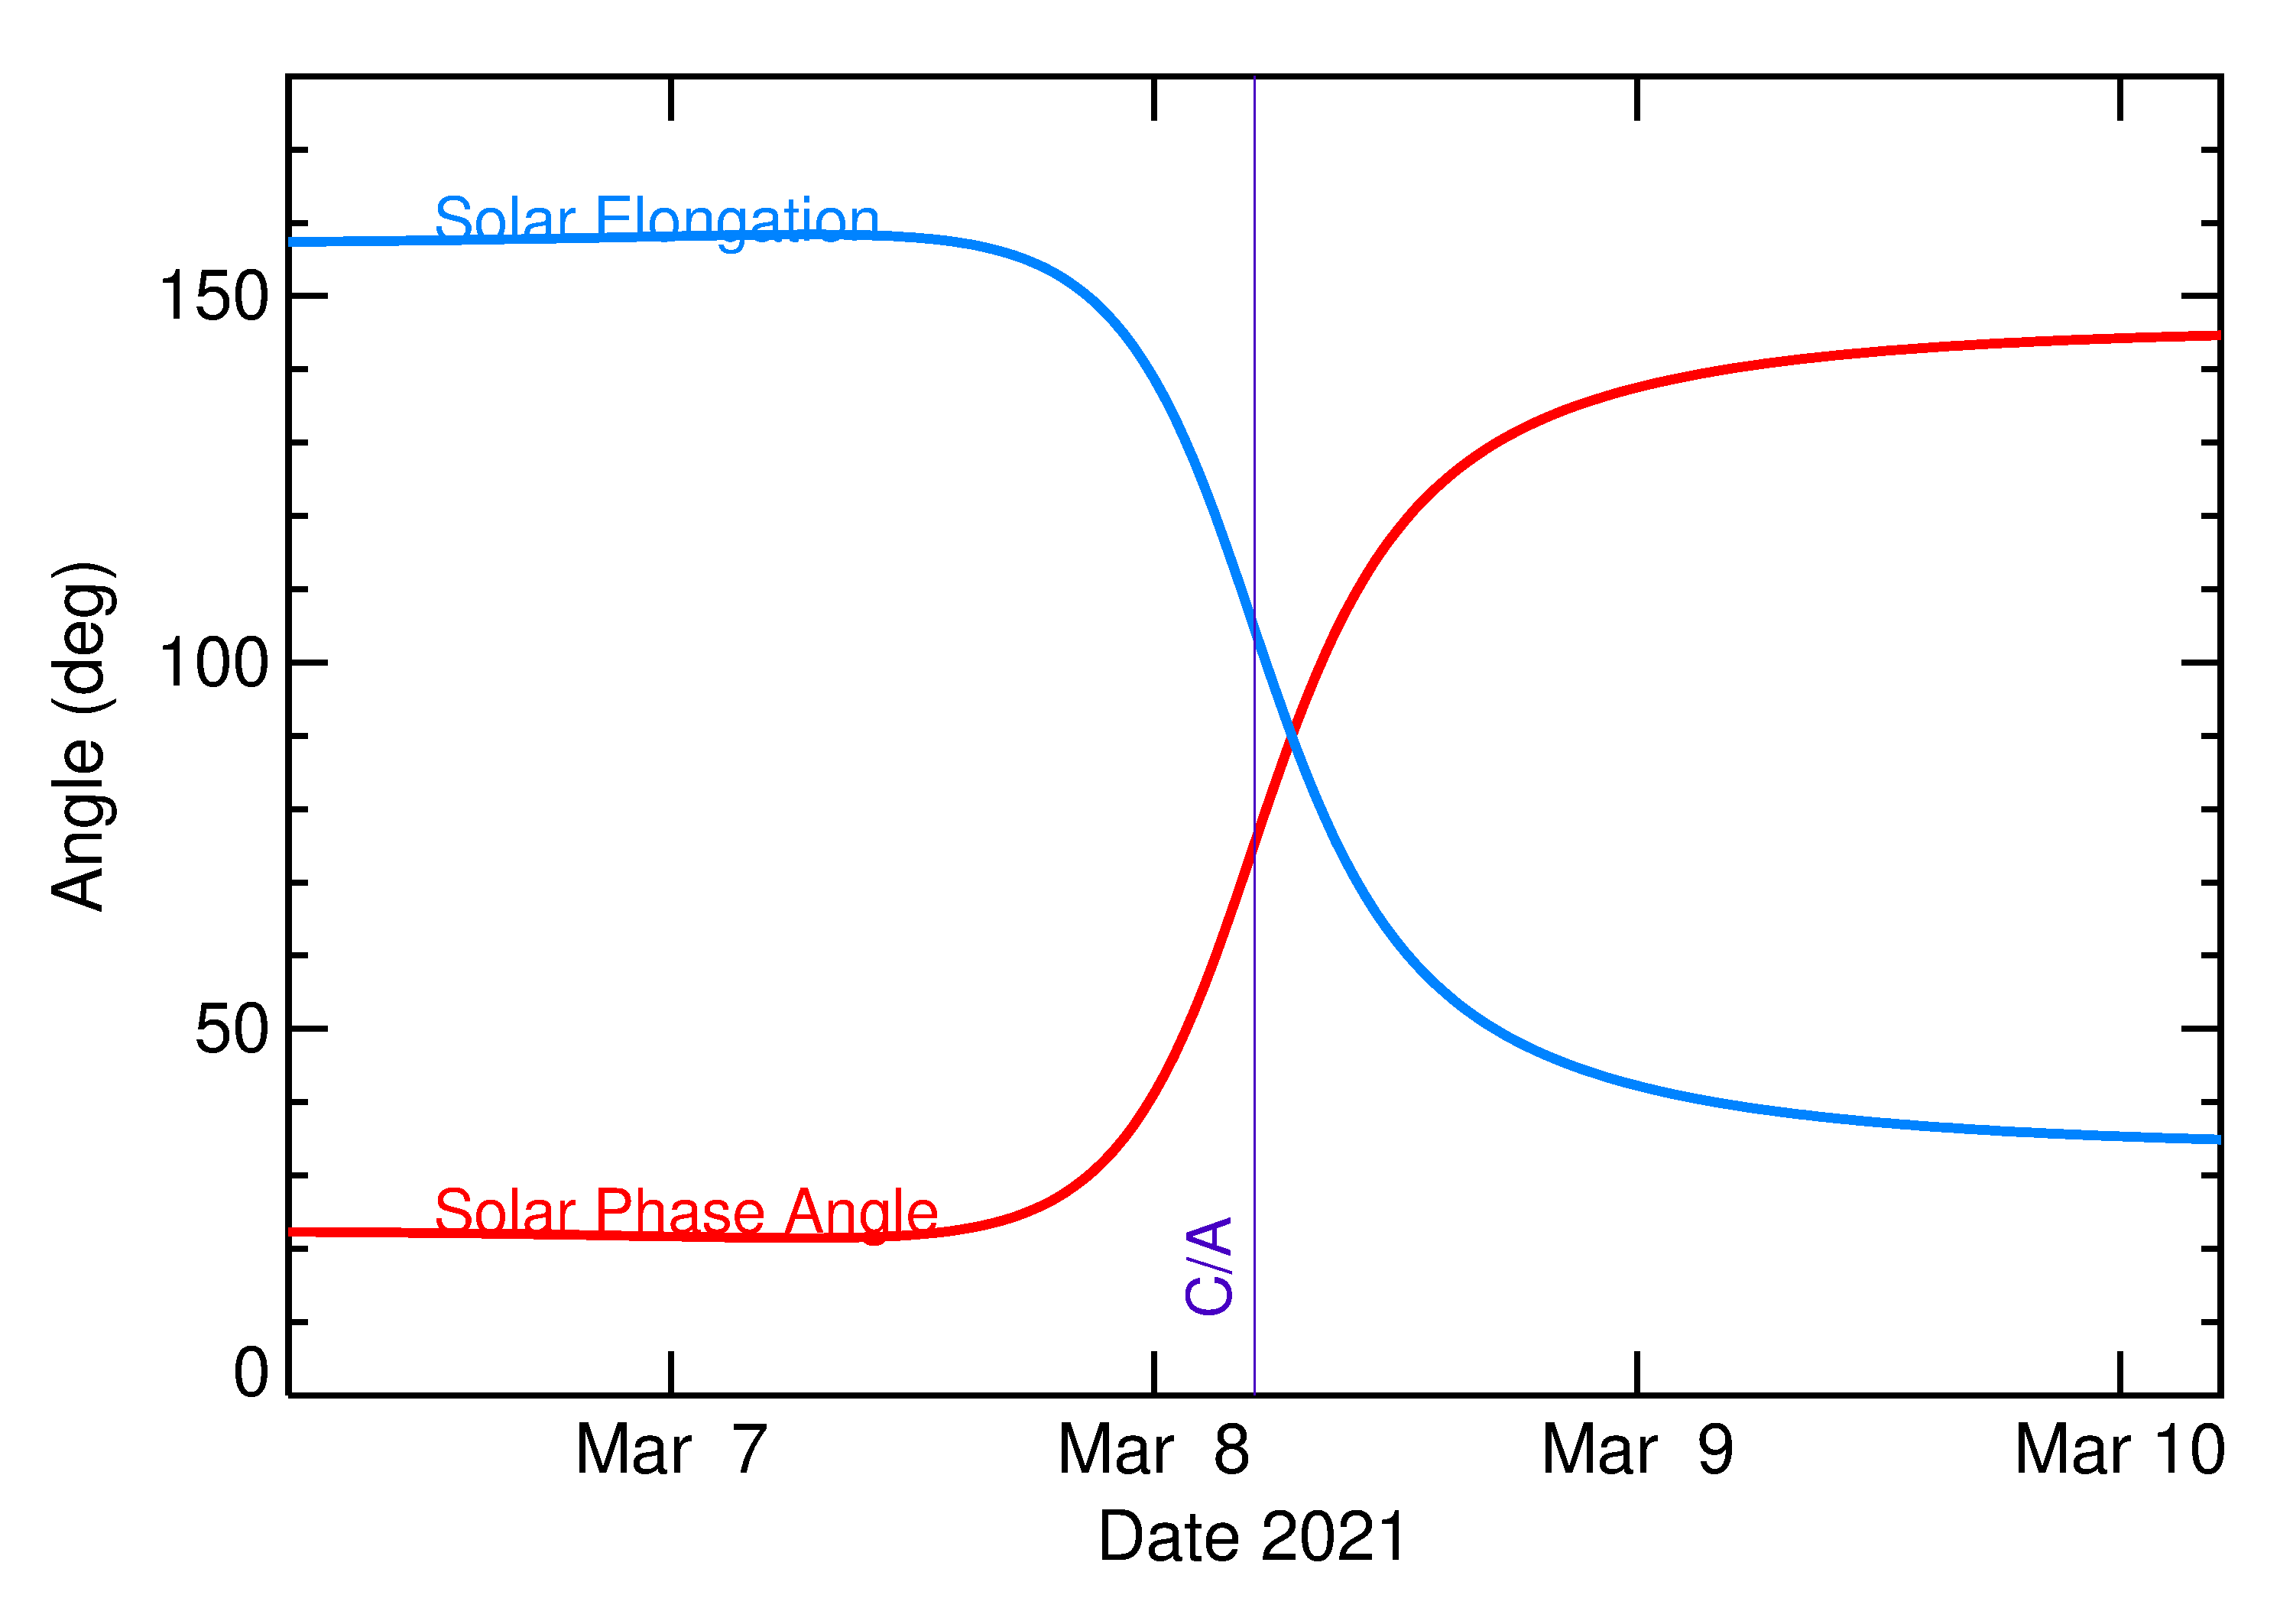 Solar Elongation and Solar Phase Angle of 2021 EF1 in the days around closest approach